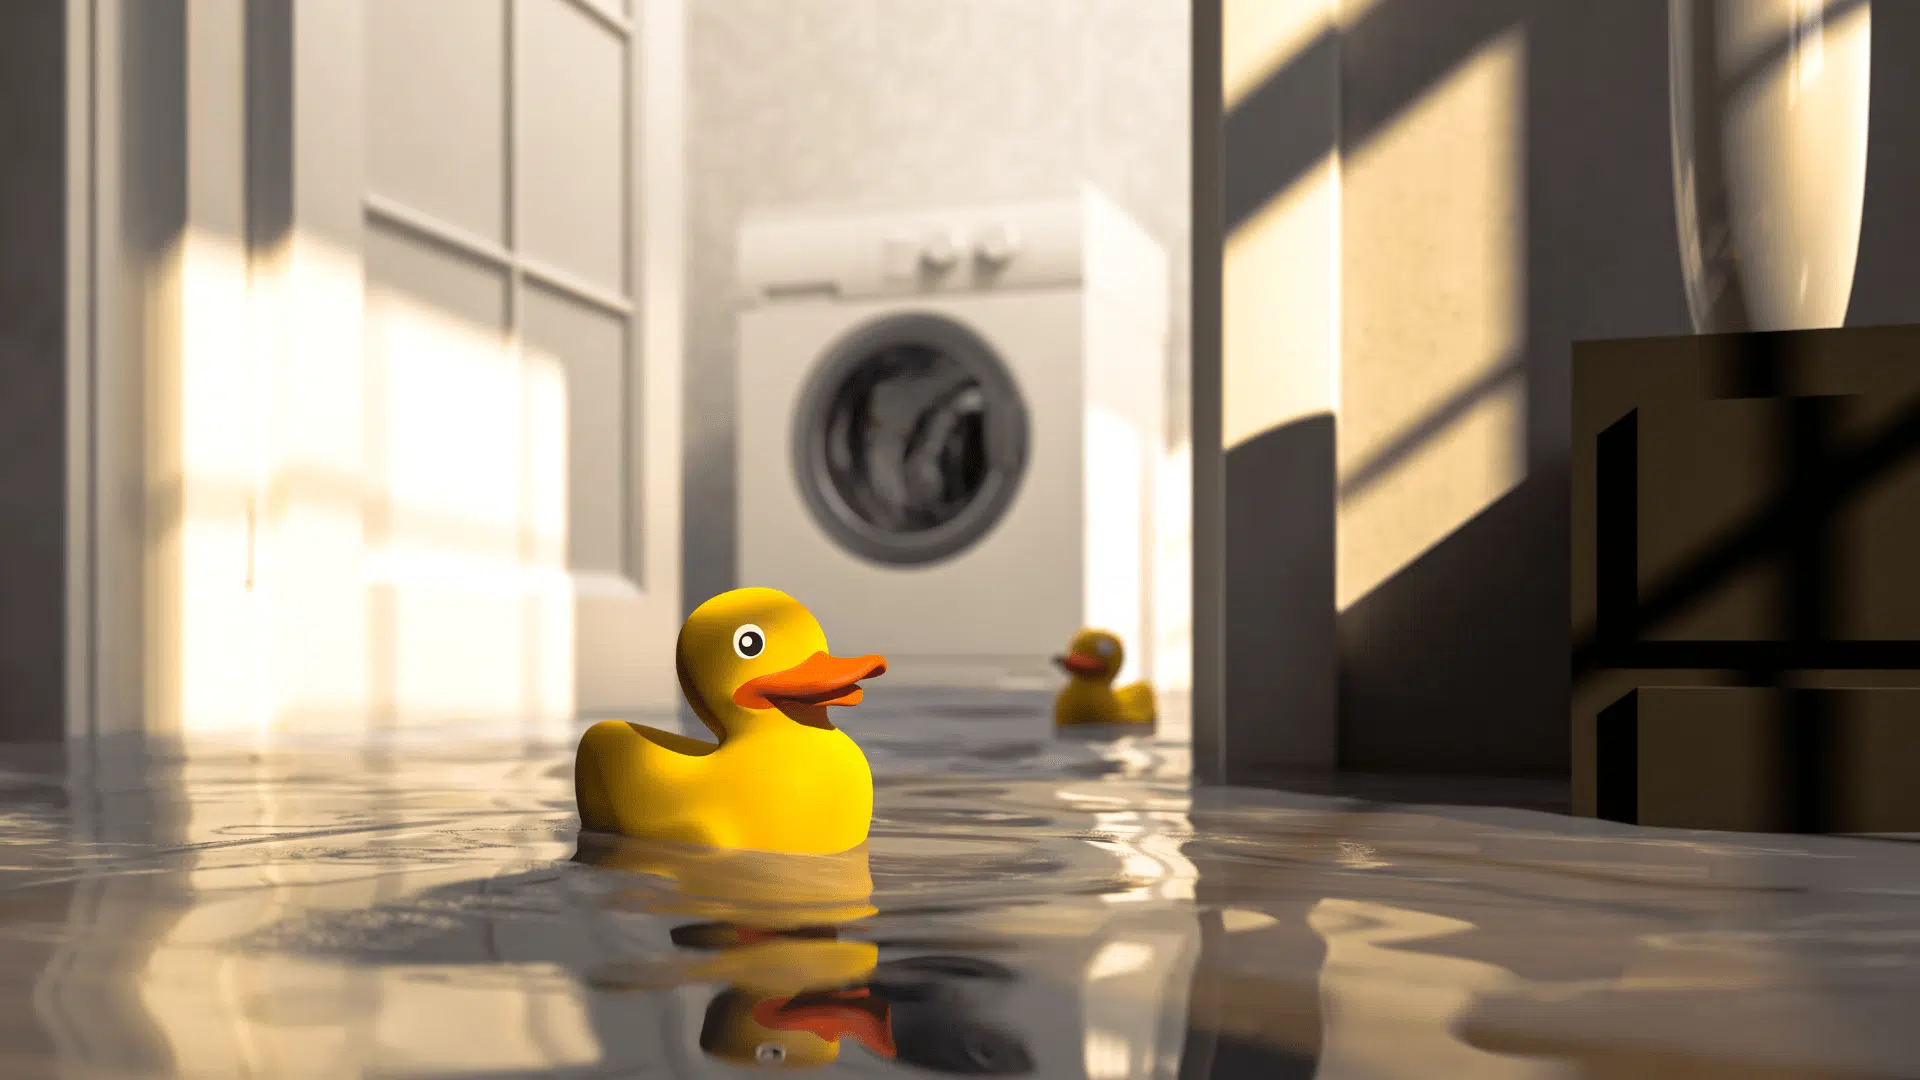 Rubber ducks floating in a flooded laundry room.